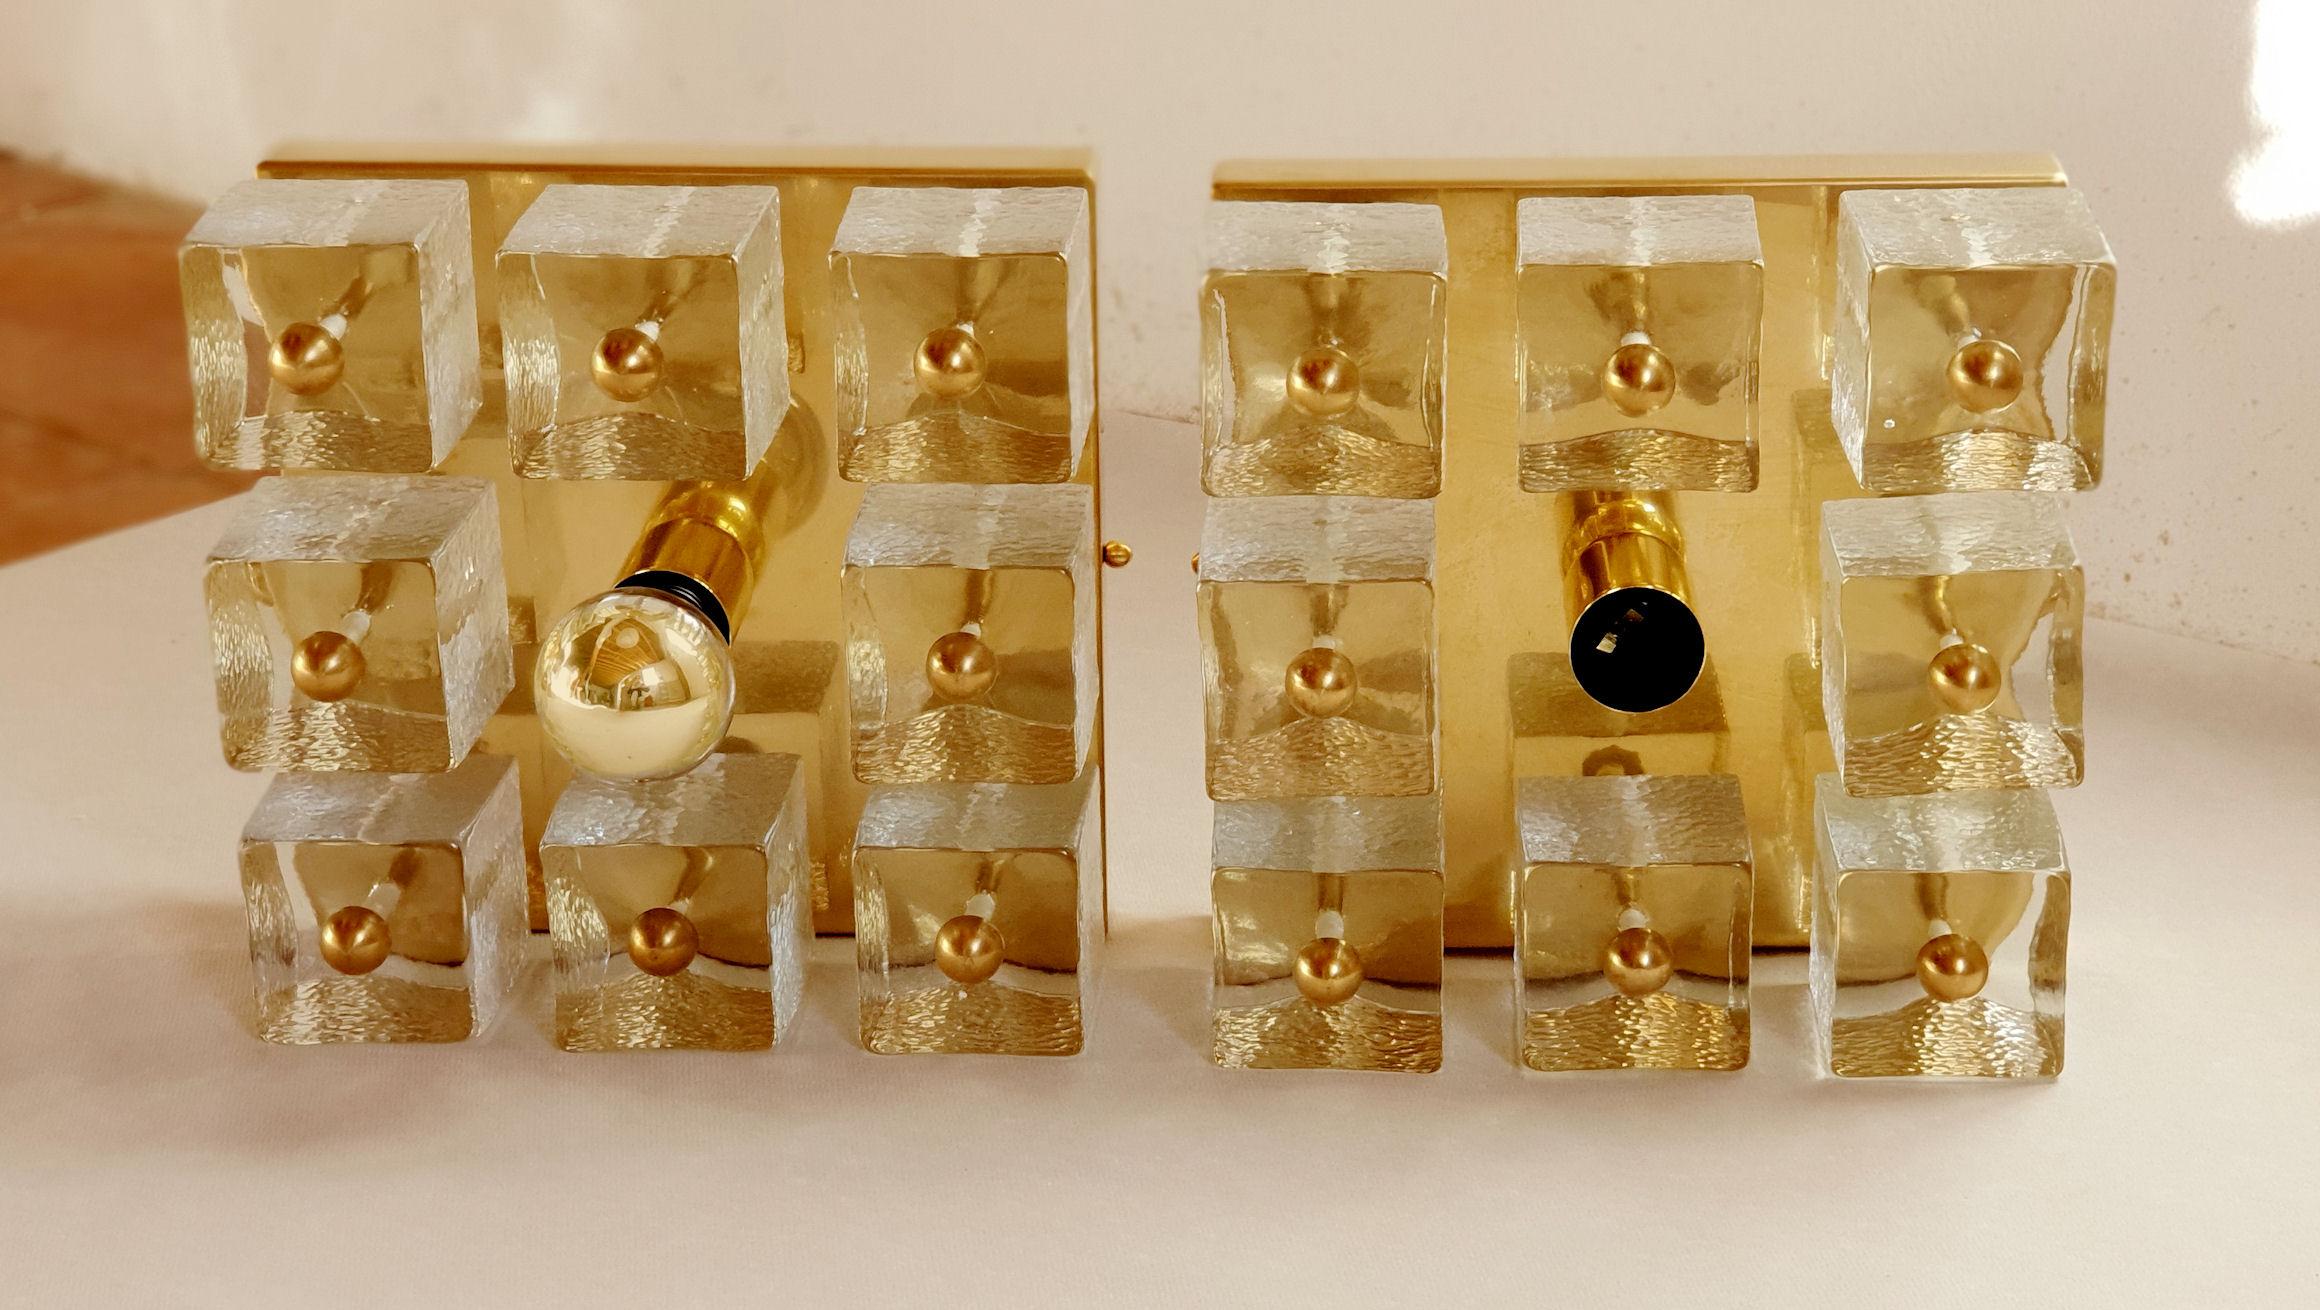 Pair of square wall sconces or flush mount lights, in brass and Murano clear glass cubes.
Attributed to Gaetano Sciolari, Murano, Italy, circa 1970s.
Brass frames have been re-polished.
1 light each, newly wired for the US.